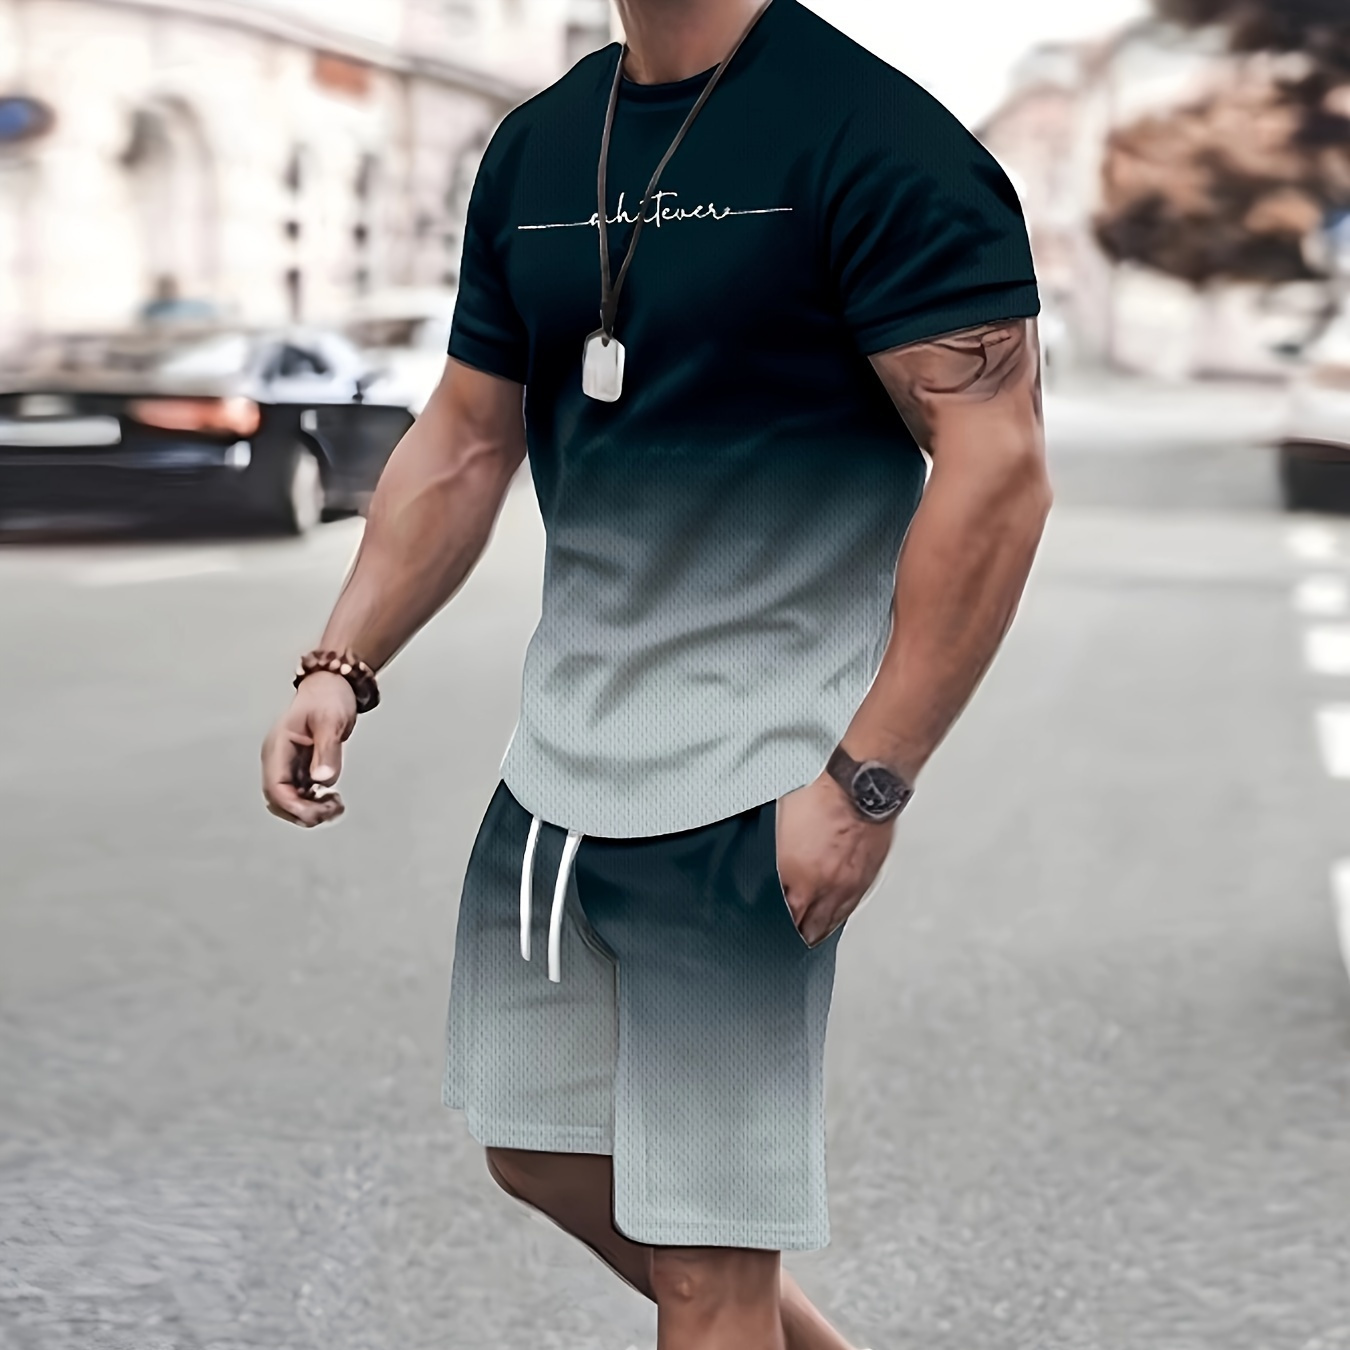 

2pcs Trendy Ombre Outfits For Men, Casual Crew Neck Short Sleeve T-shirt And Shorts Set For Summer, Men's Clothing Vacation Workout